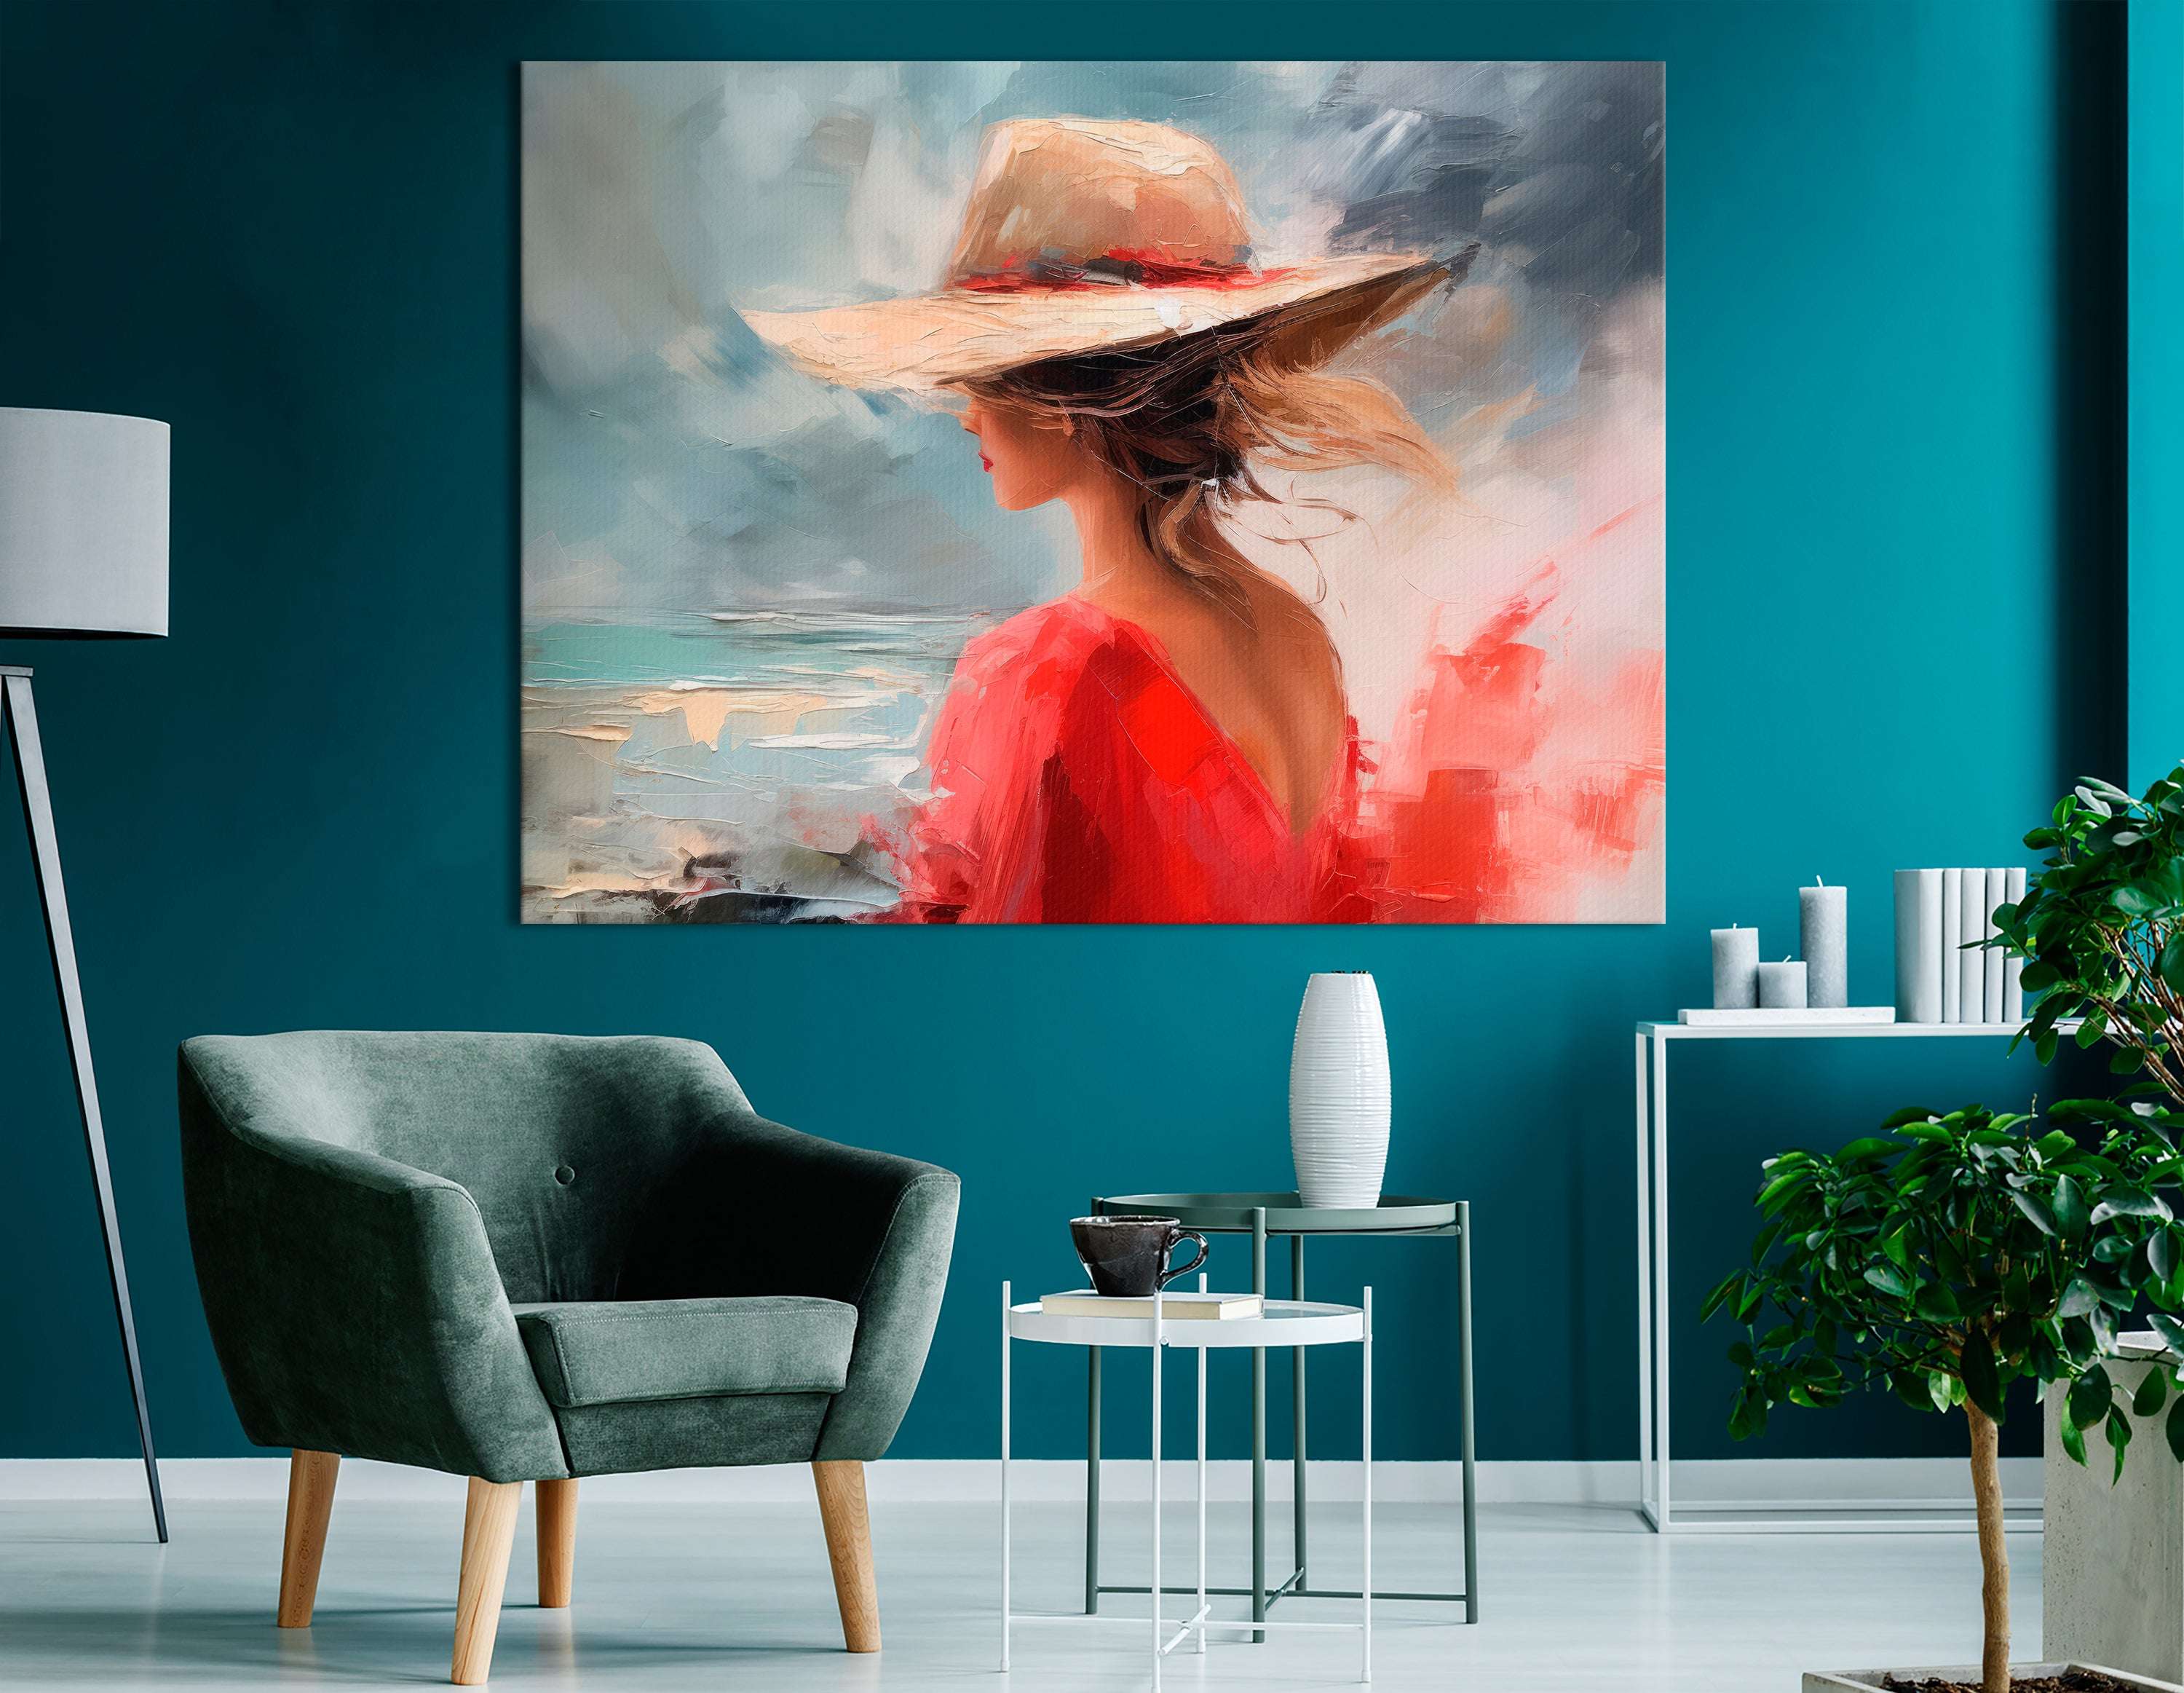 Woman in Red Hat with Sea View - Canvas Print - Artoholica Ready to Hang Canvas Print